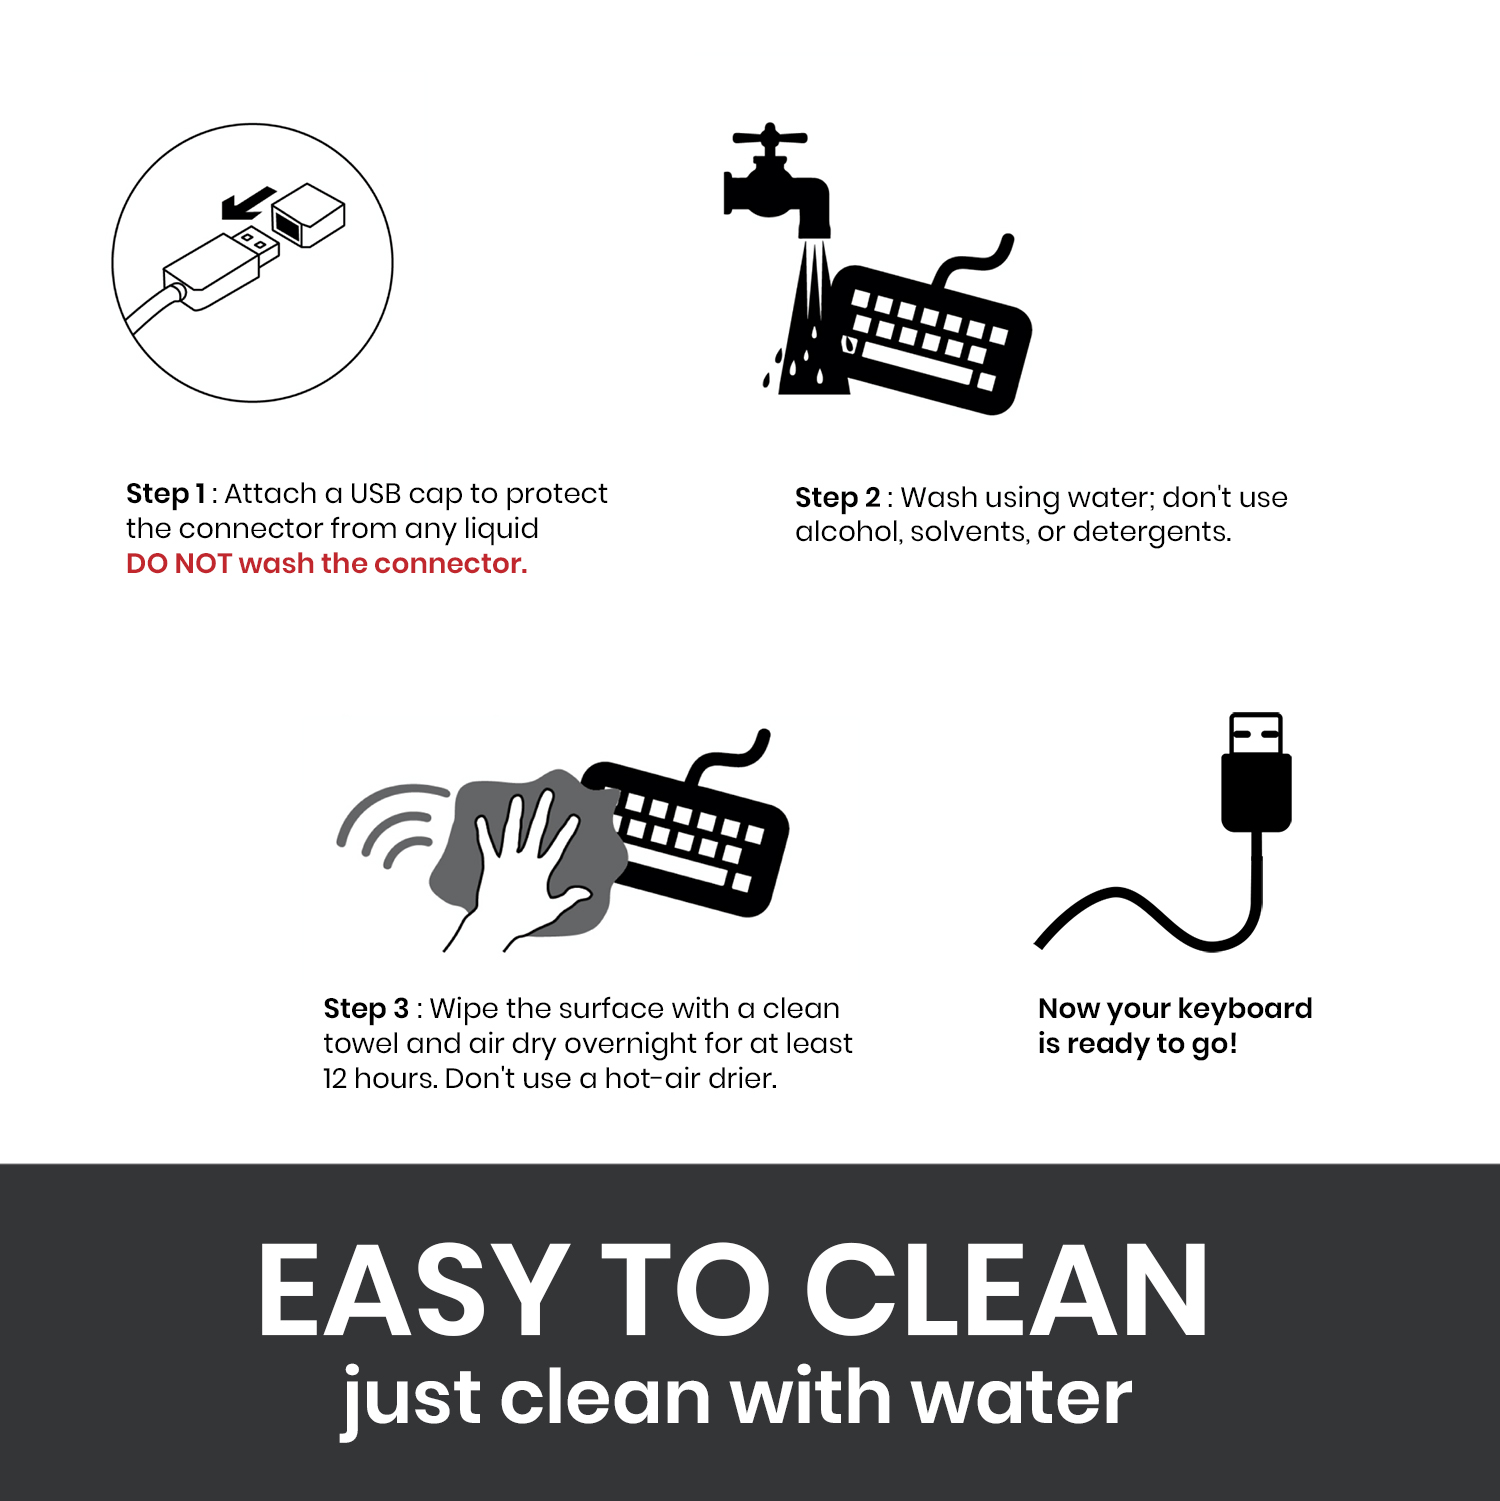 HOW TO HAND WASH YOUR KEYBOARD: